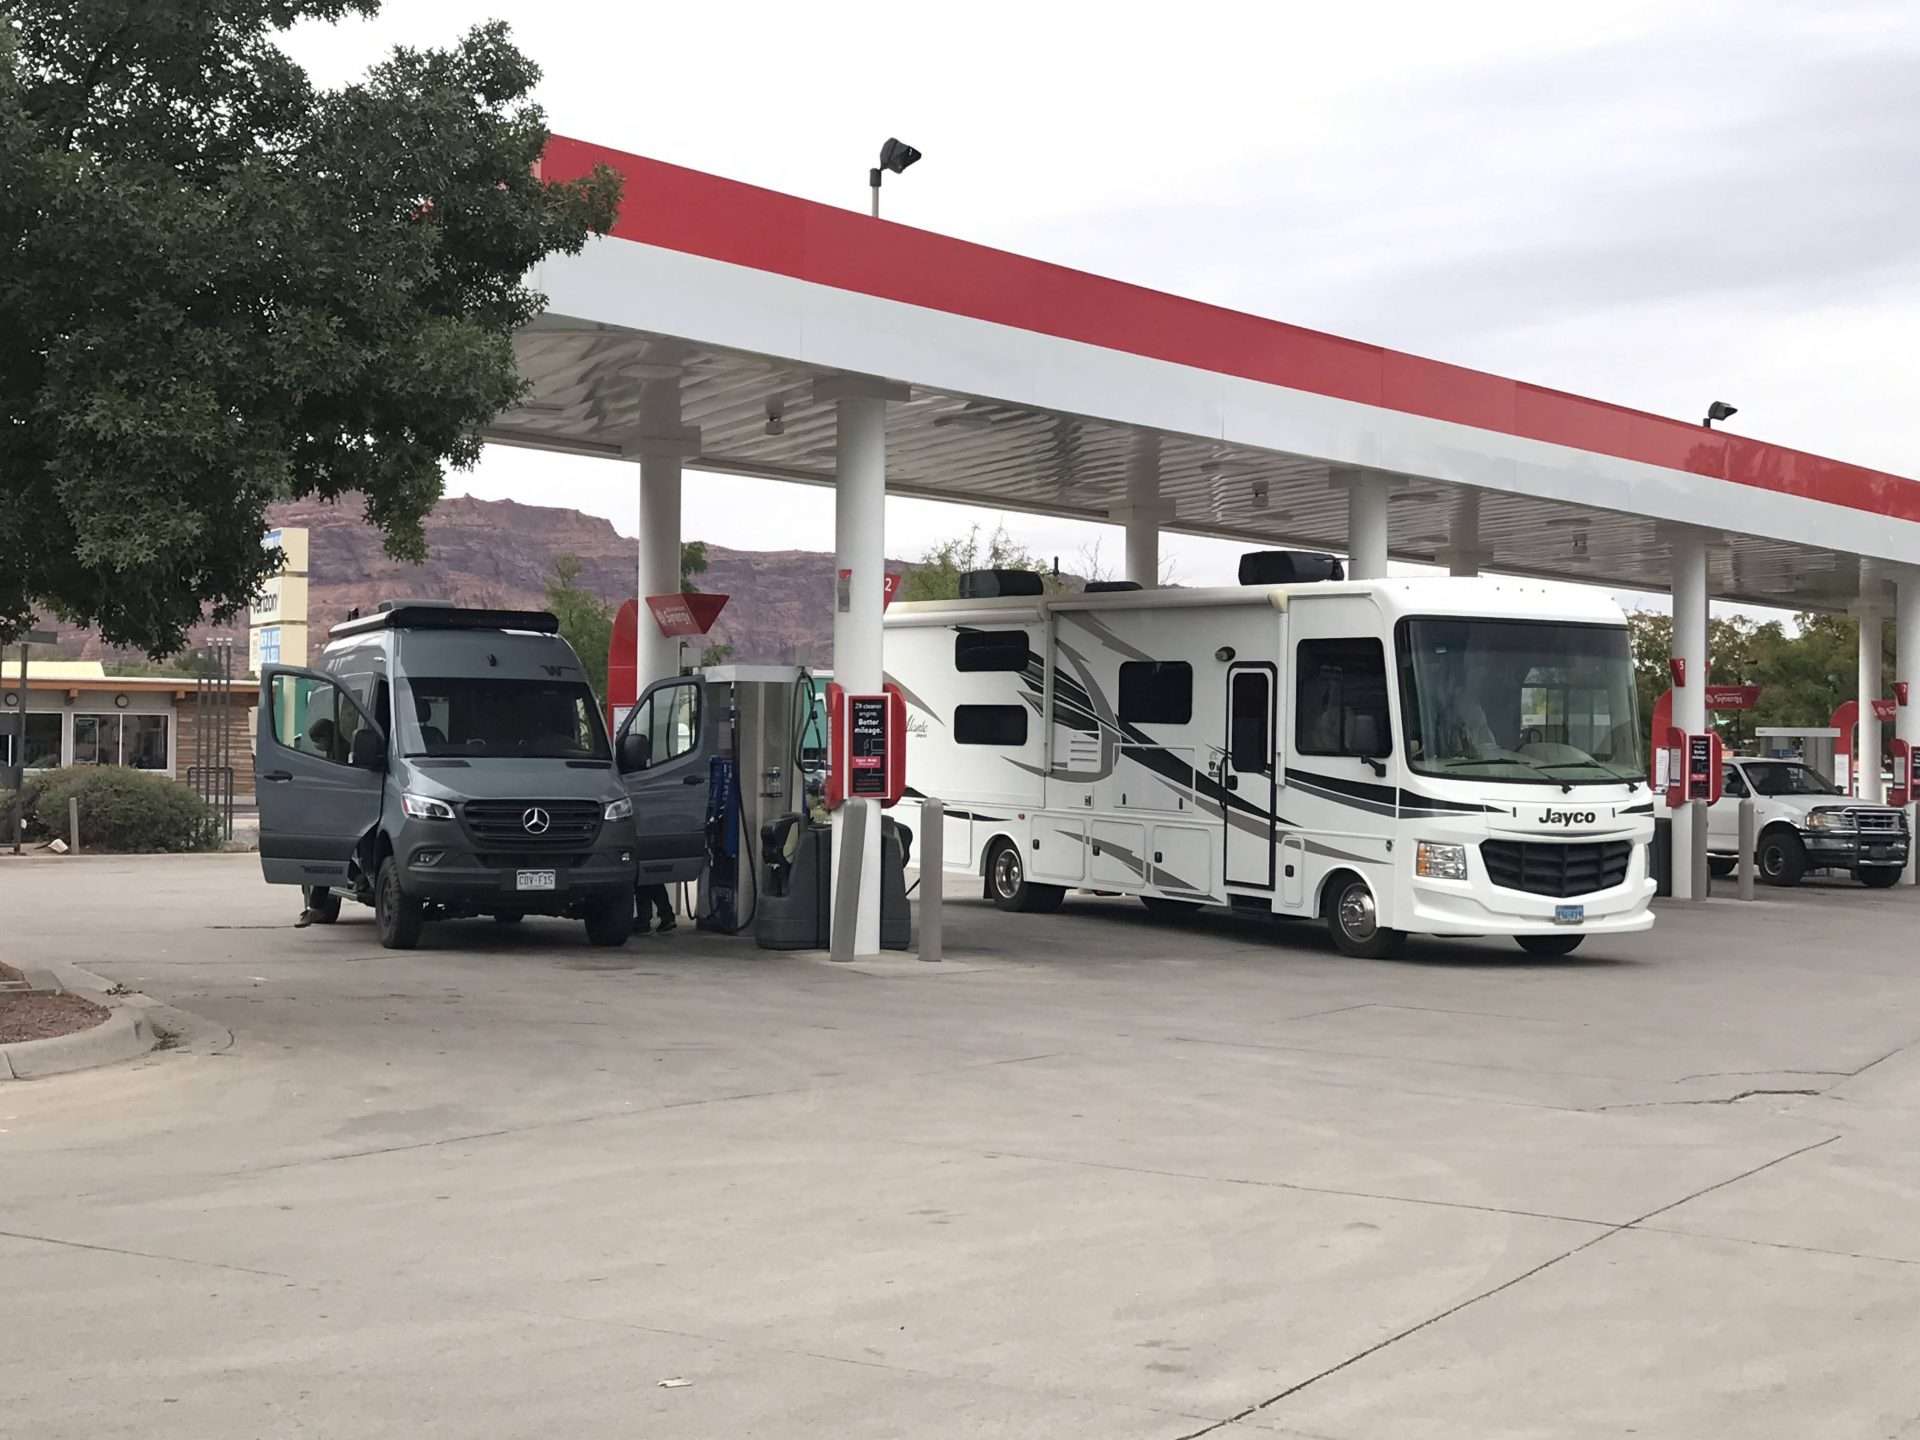 Class B and Class A motorhome at a gas station